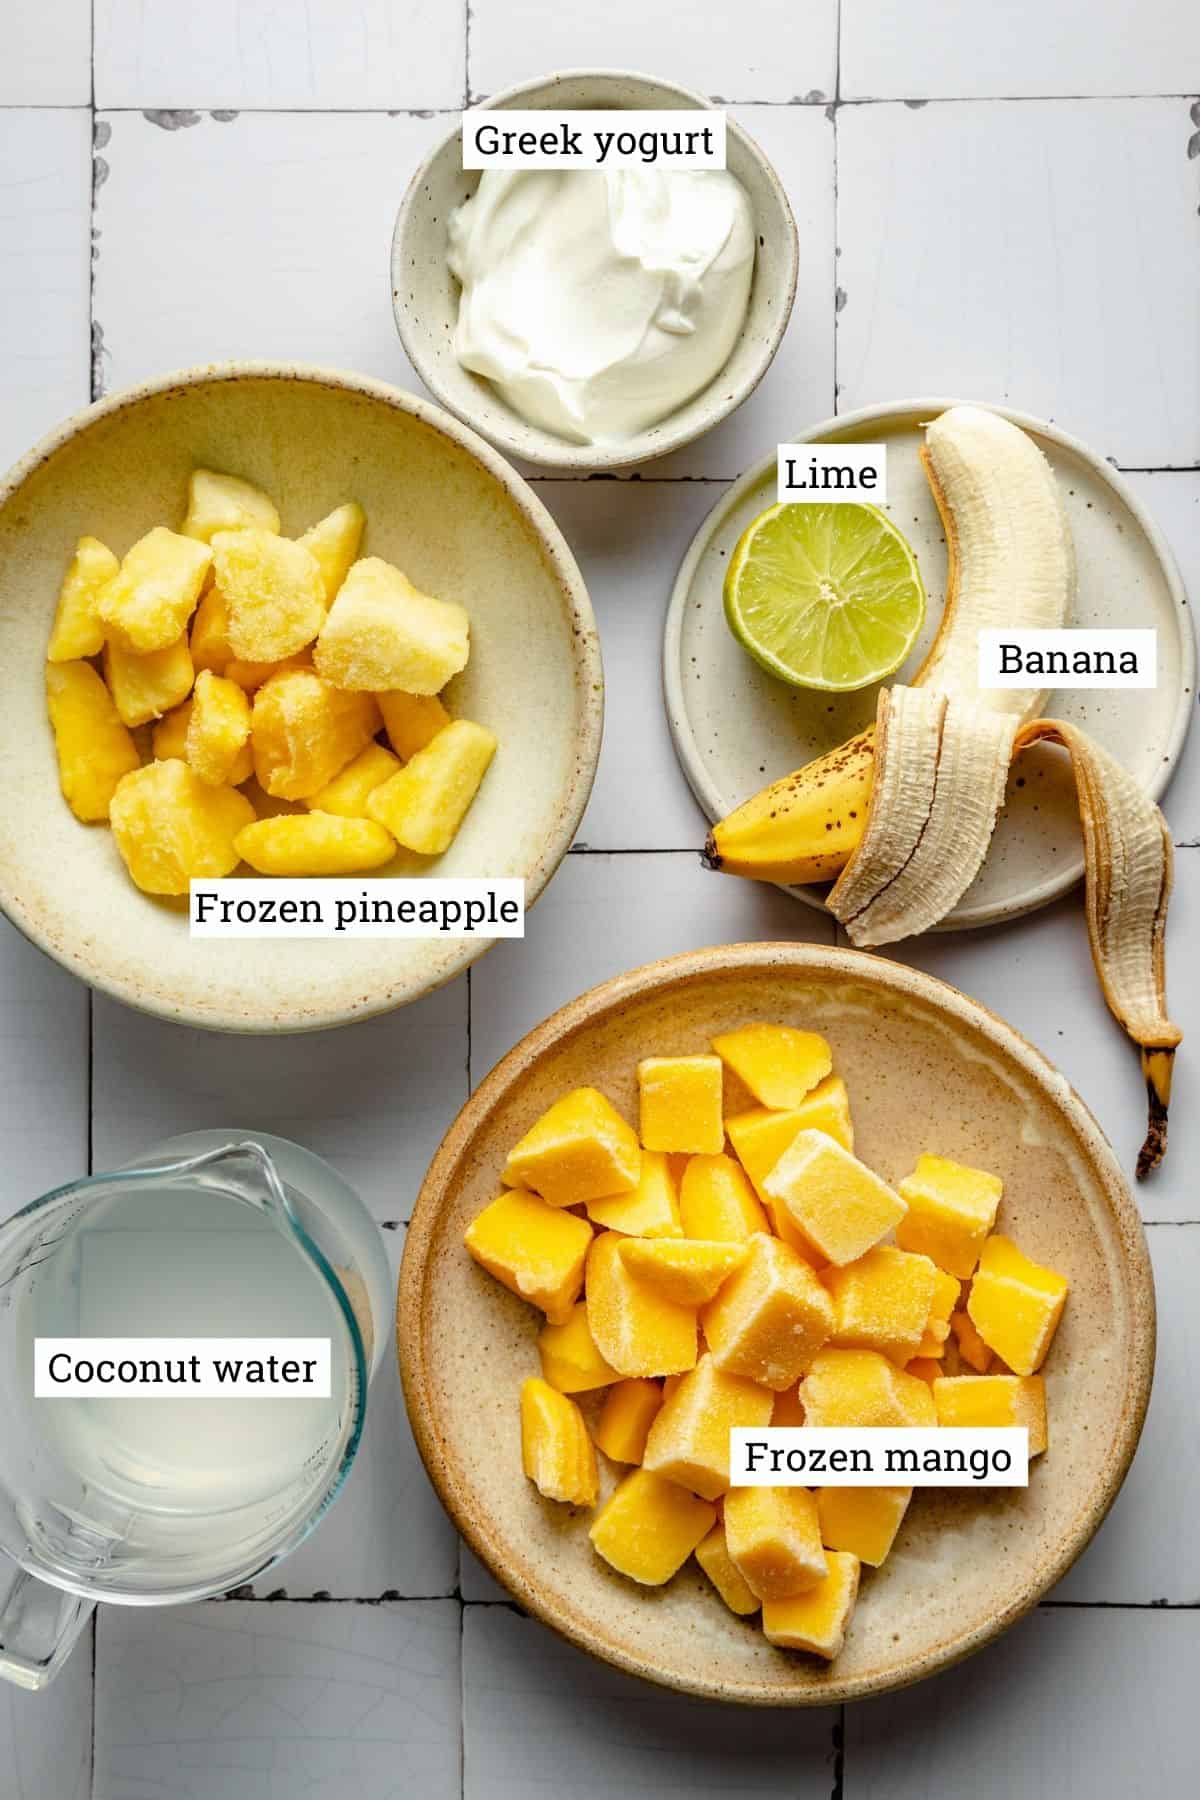 ingredients for smoothie in various bowls with labels.